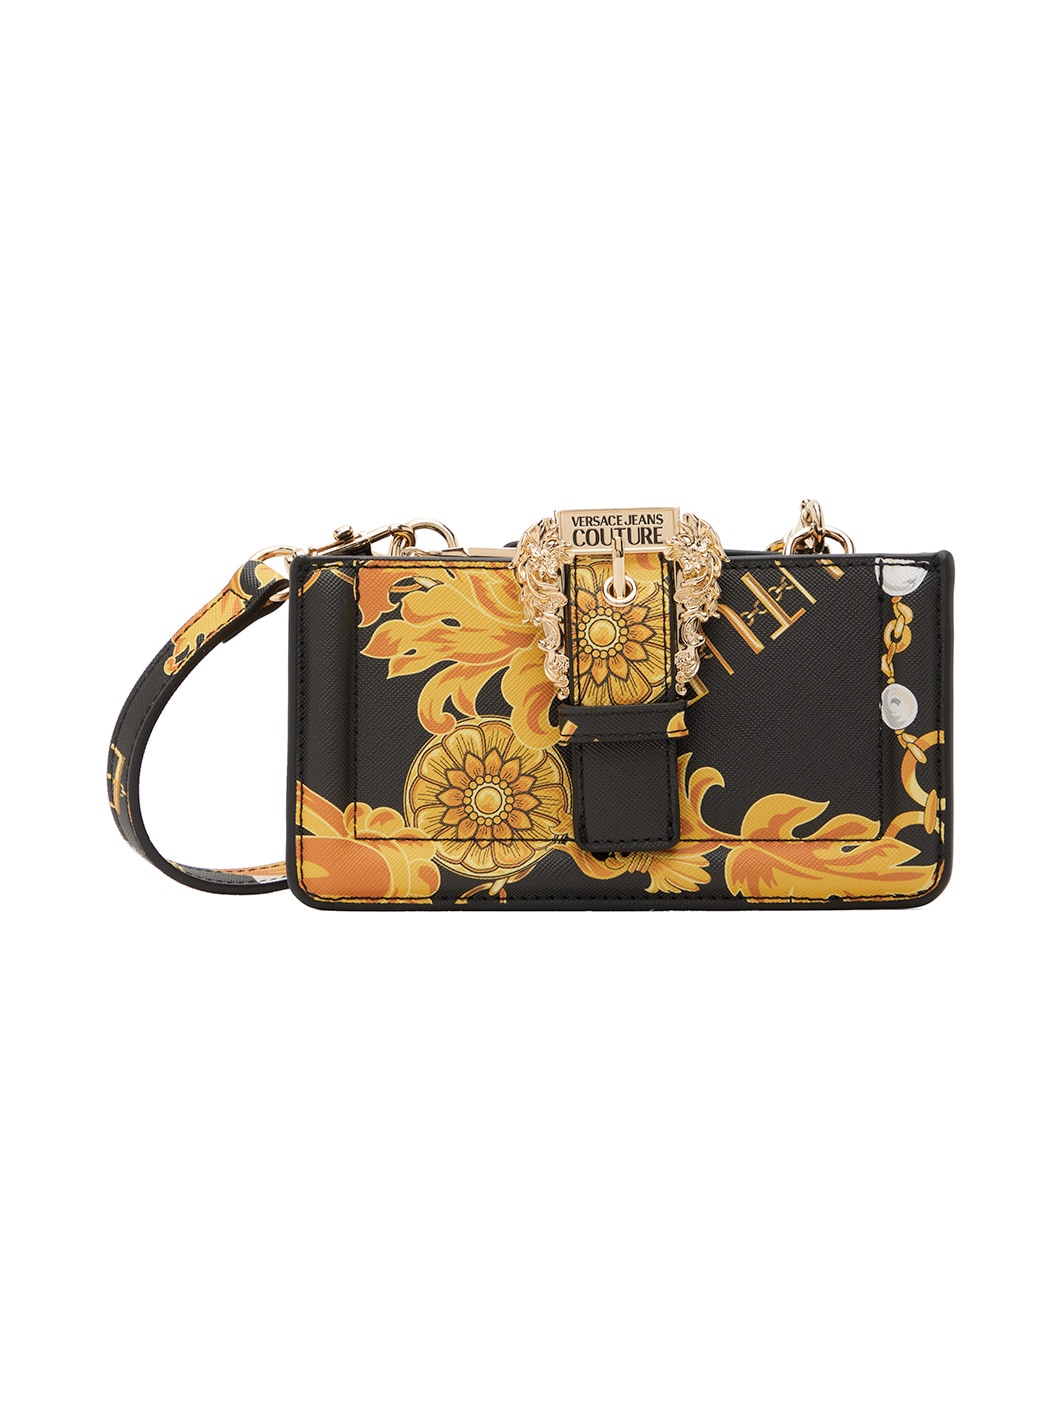 Black & Gold Couture 01 Bag - 1